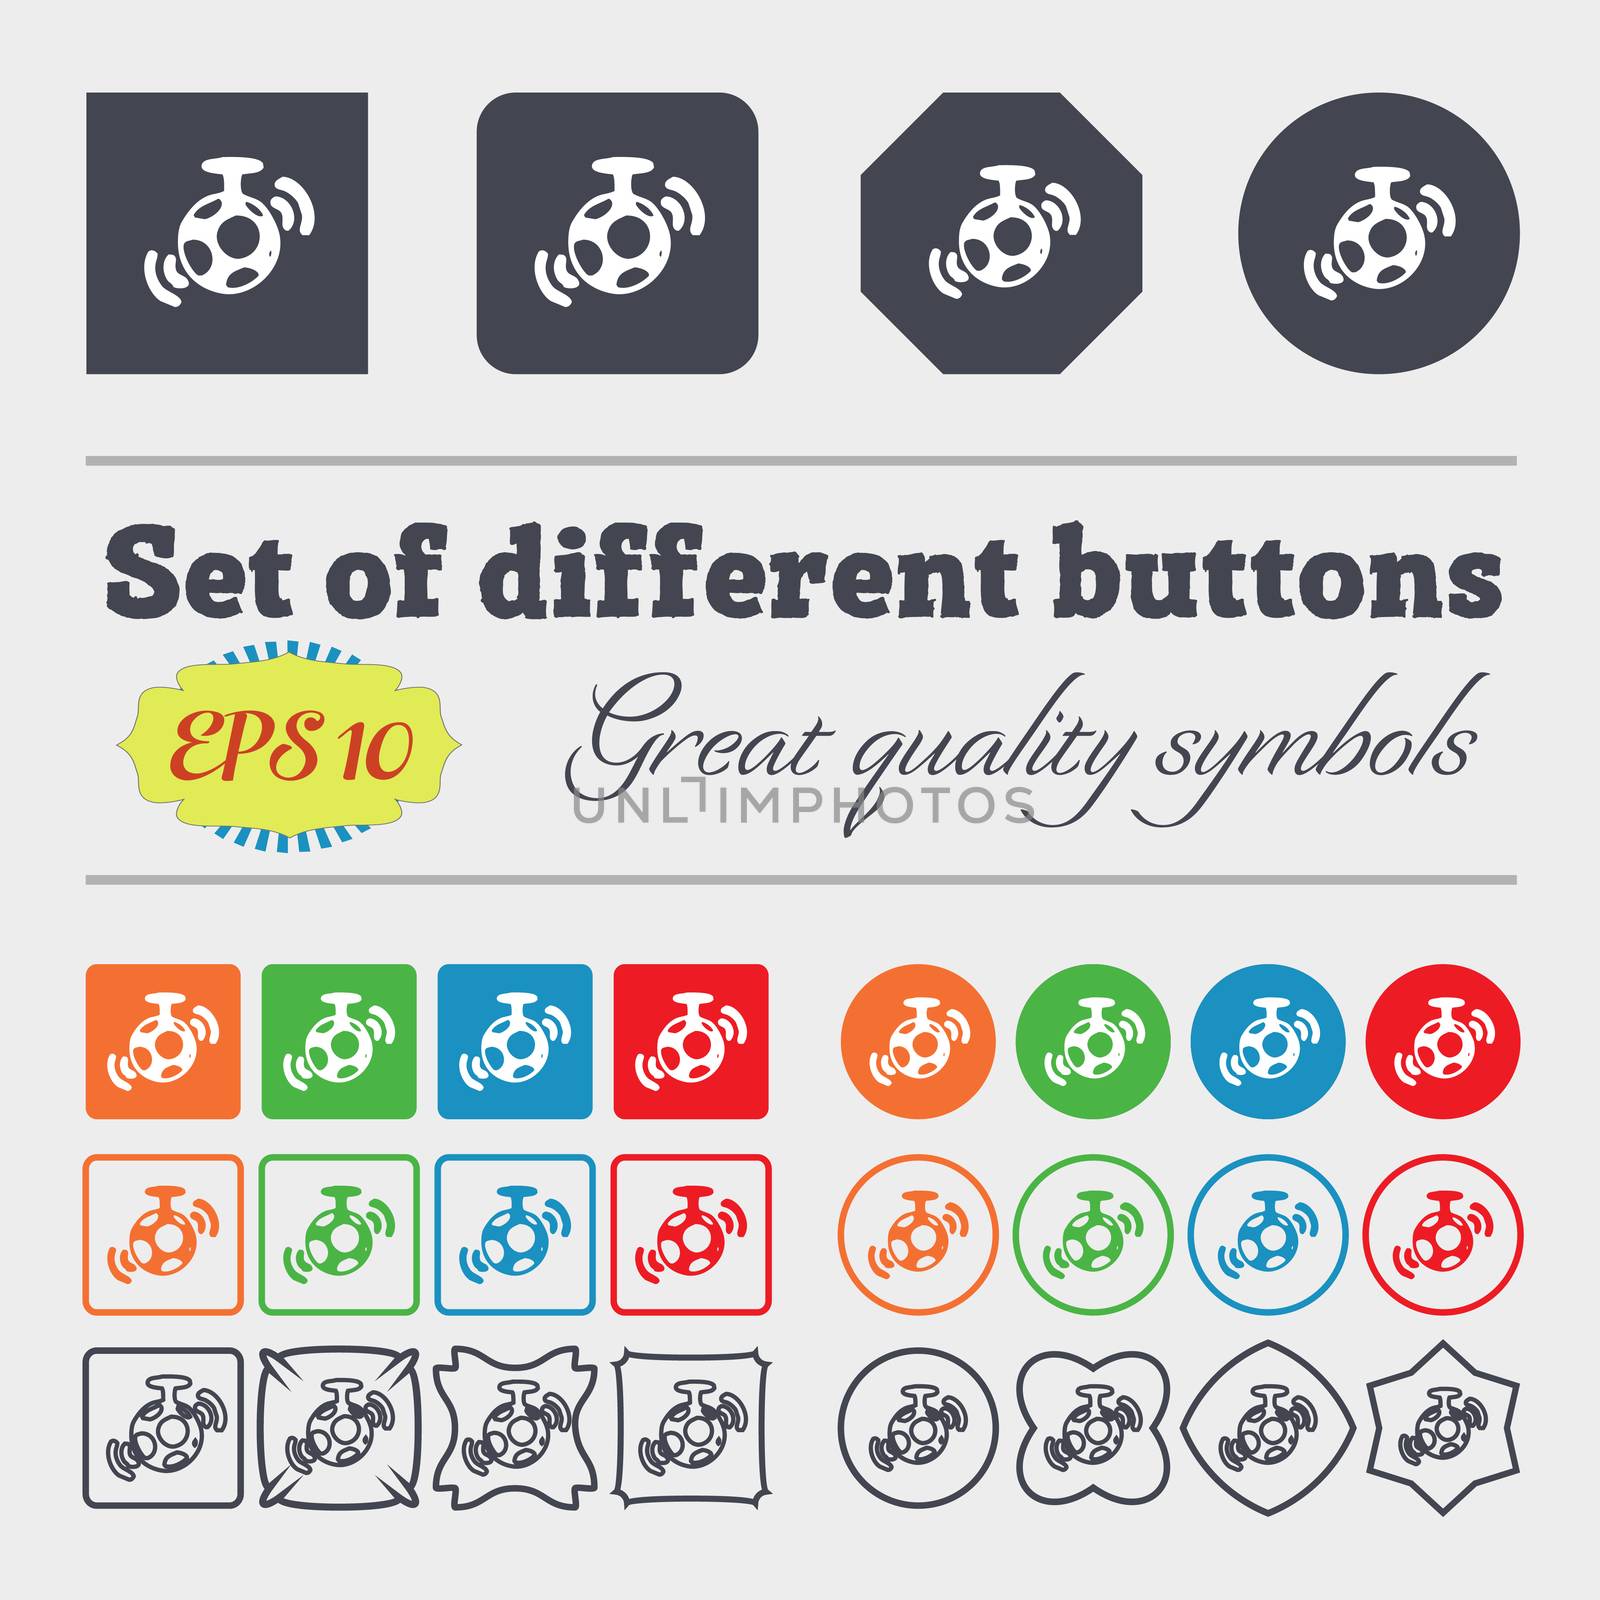 mirror ball disco icon sign. Big set of colorful, diverse, high-quality buttons. illustration